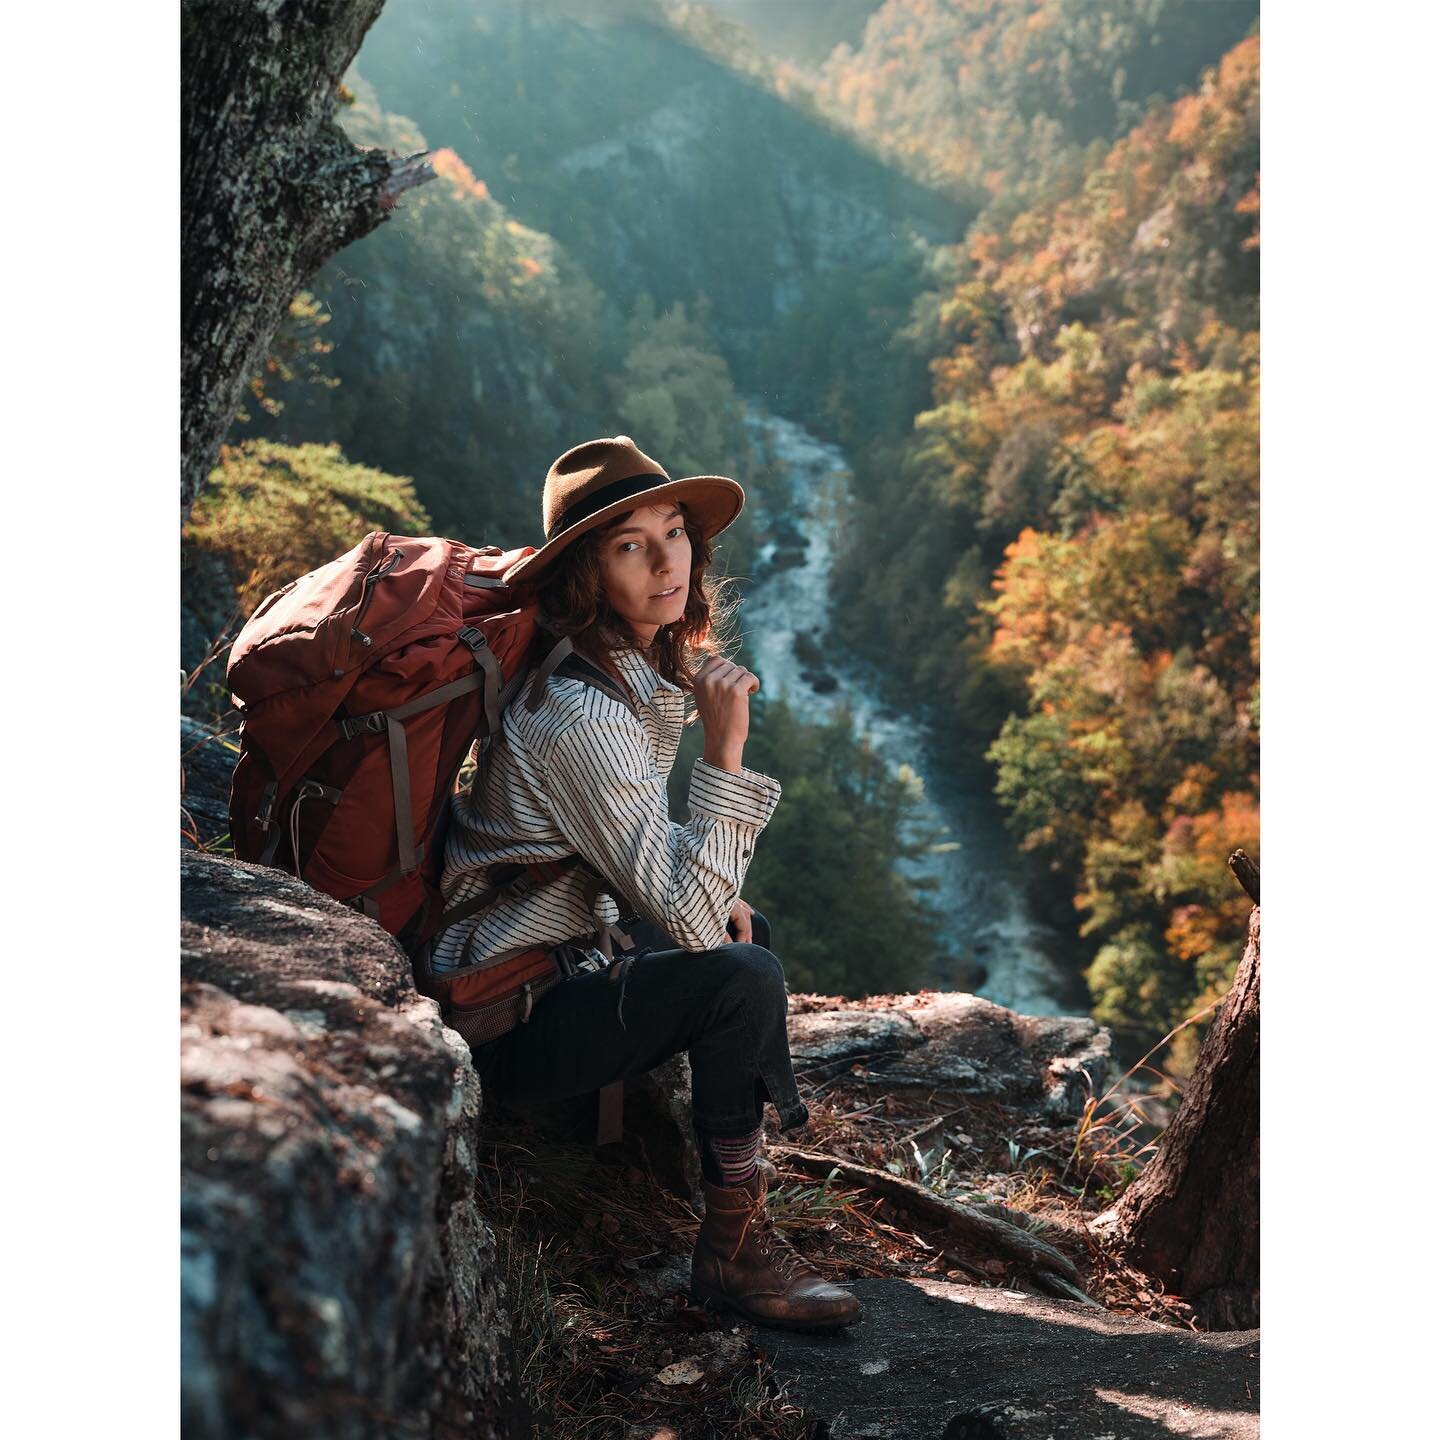 With the cooler weather rolling in, had to share one more of our faves from our cover story shoot for @atlantamagazine. This weekend is looking prime for some good hiking!